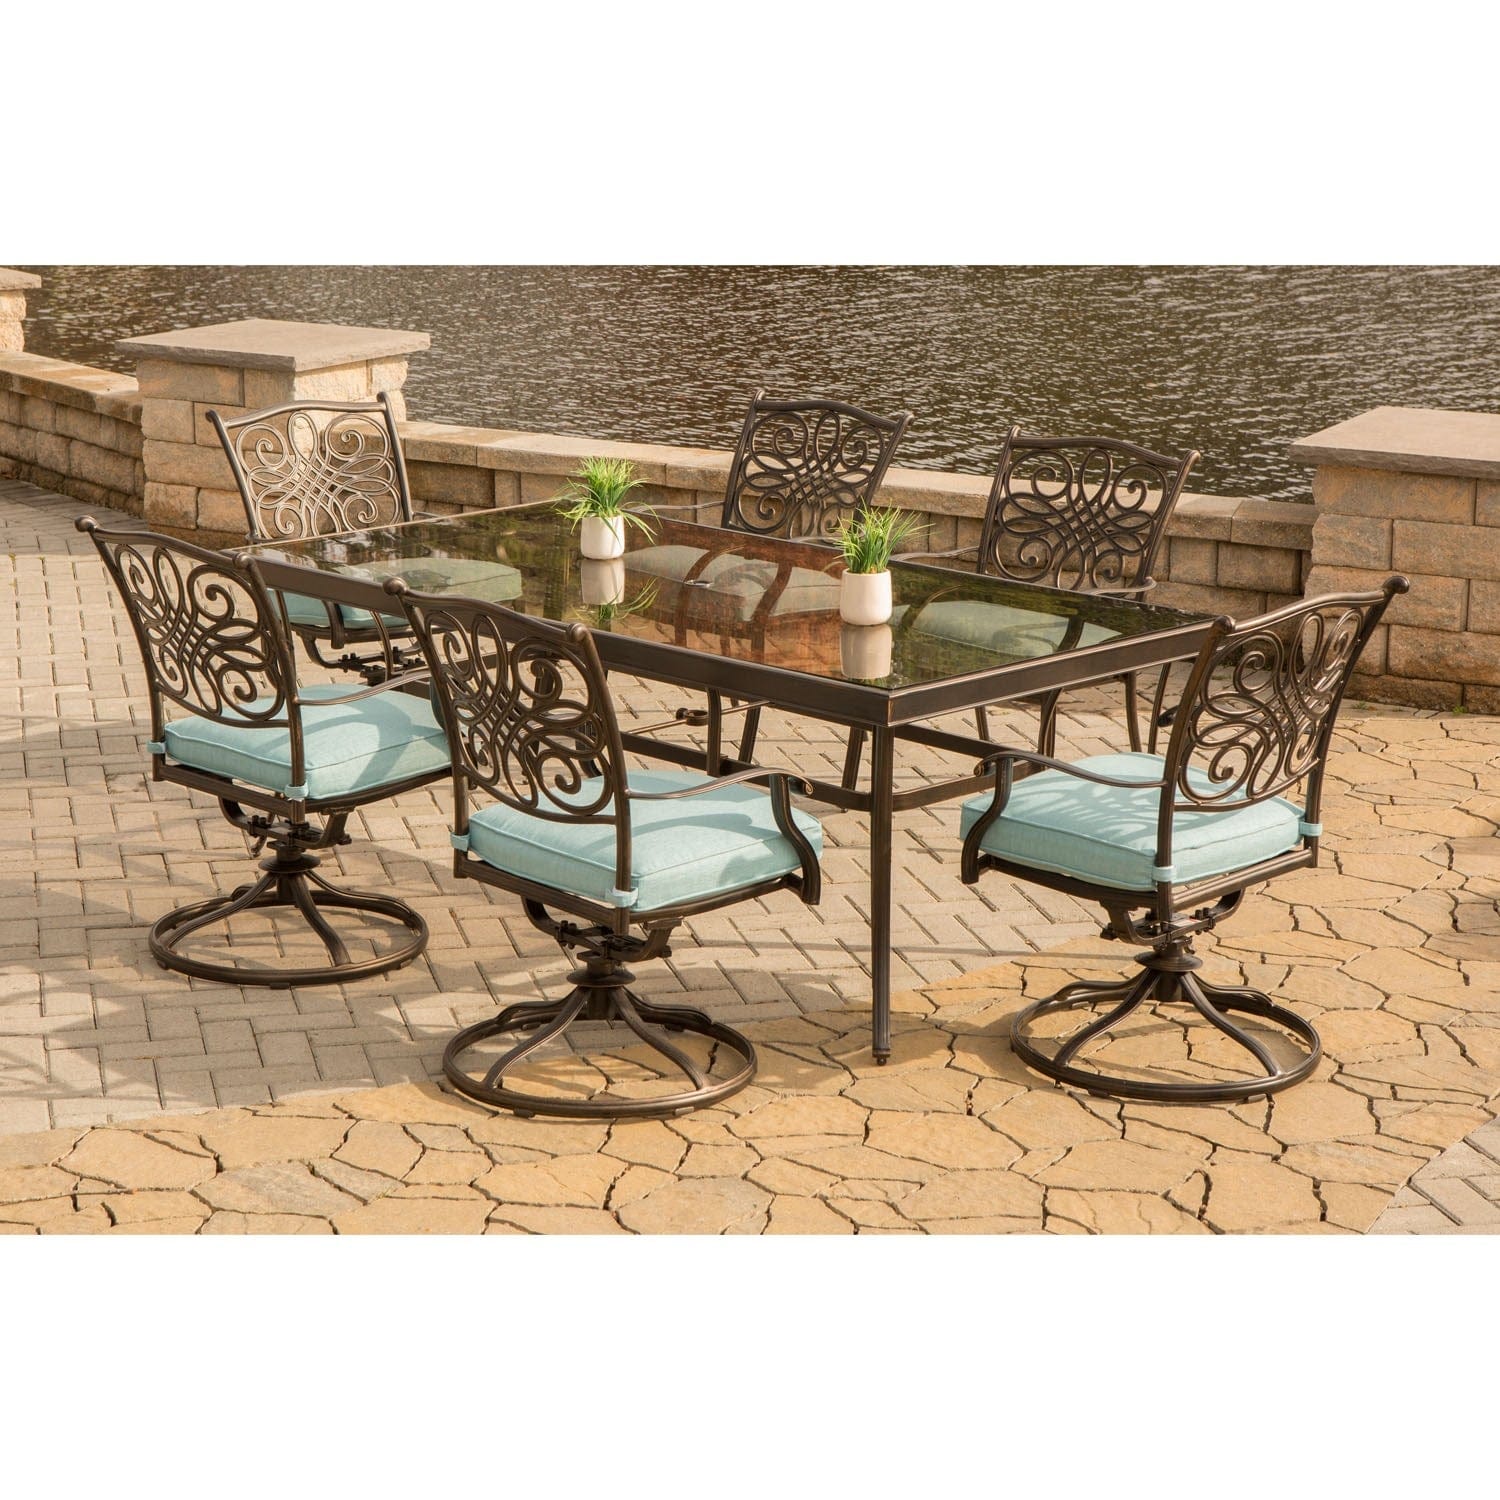 Hanover Outdoor Dining Set Hanover - Traditions 7-Piece Dining Set in Blue with Extra Large Glass-Top Dining Table - TRADDN7PCSWG-B